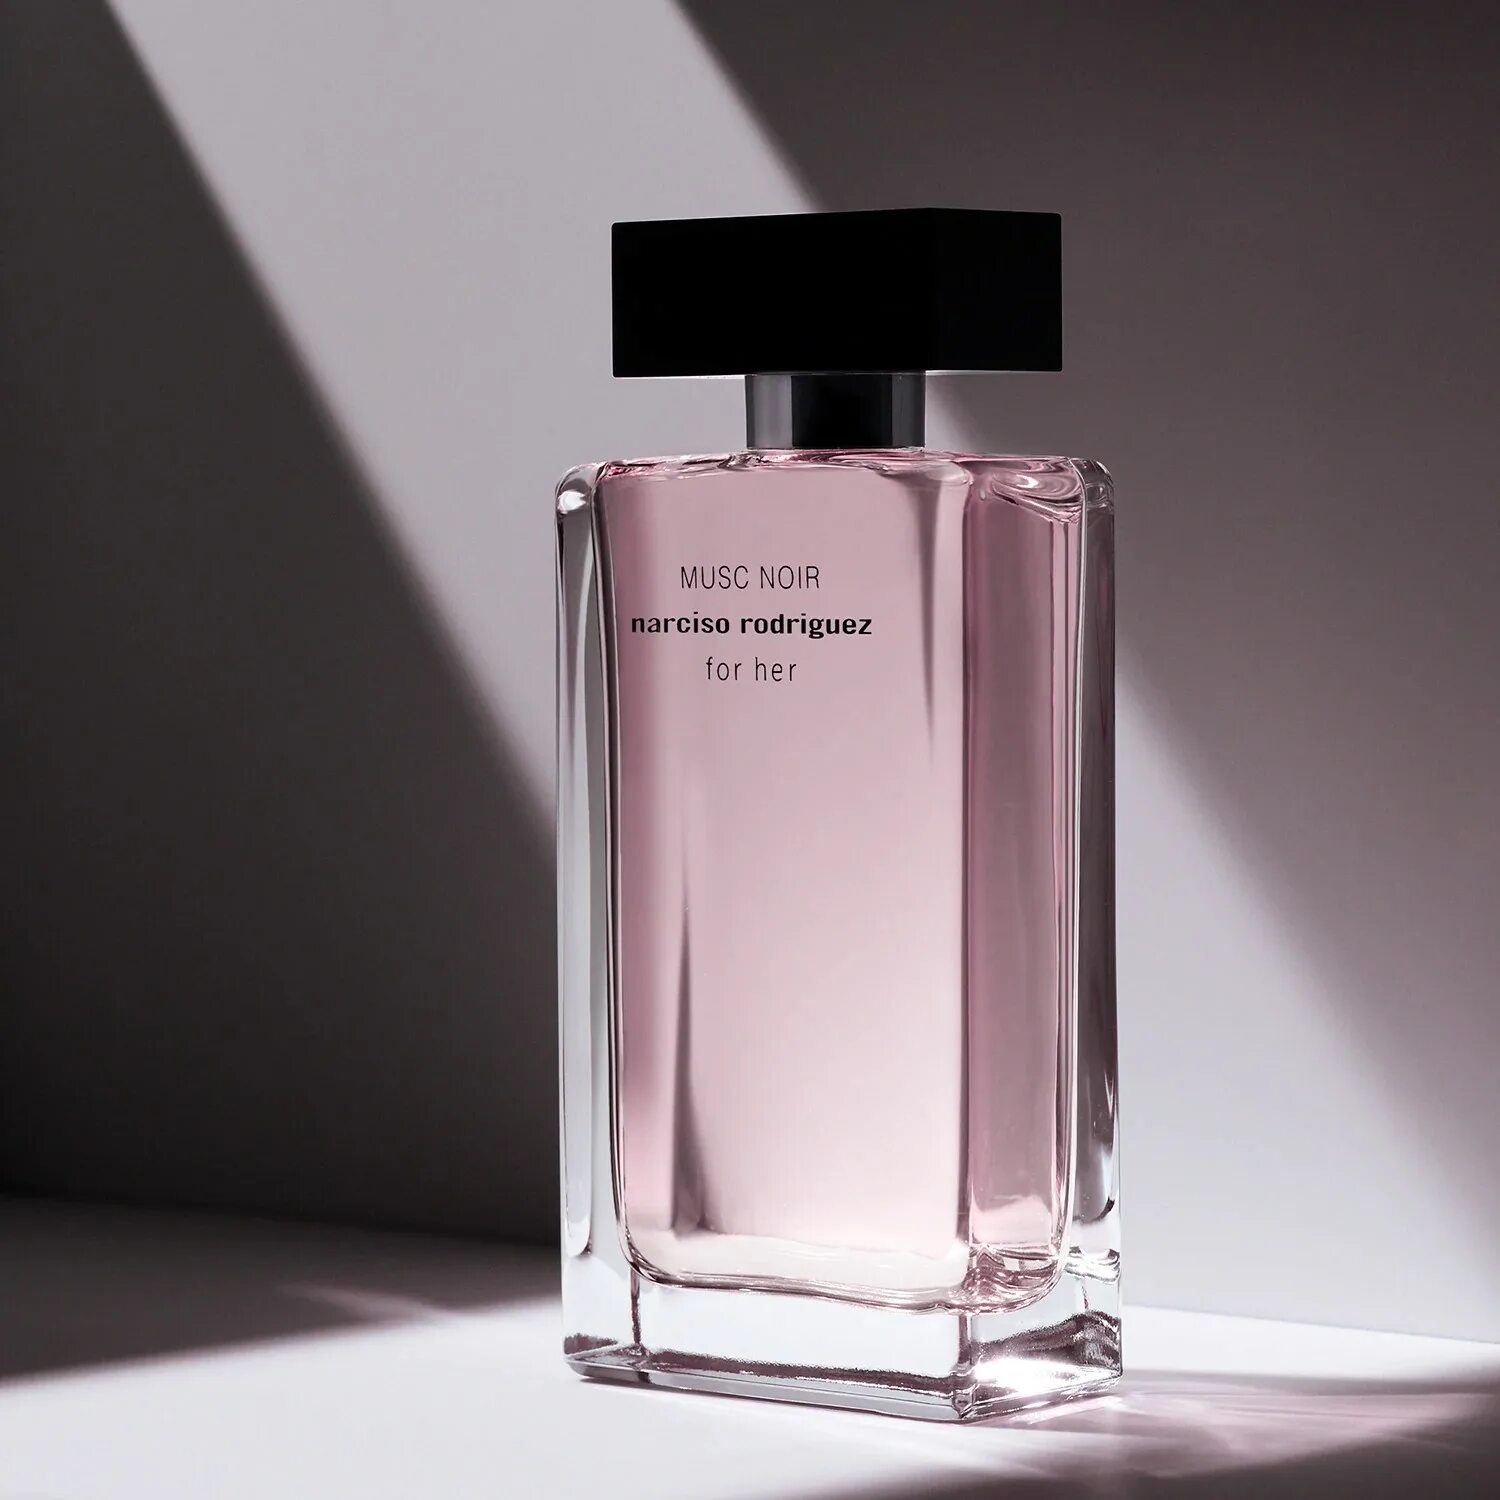 Narciso Rodriguez for her Musk. Musk Noir for her Narciso Rodriguez. Narciso Rodriguez Musk Noir. Narciso Rodriguez Musc. Парфюм narciso rodriguez